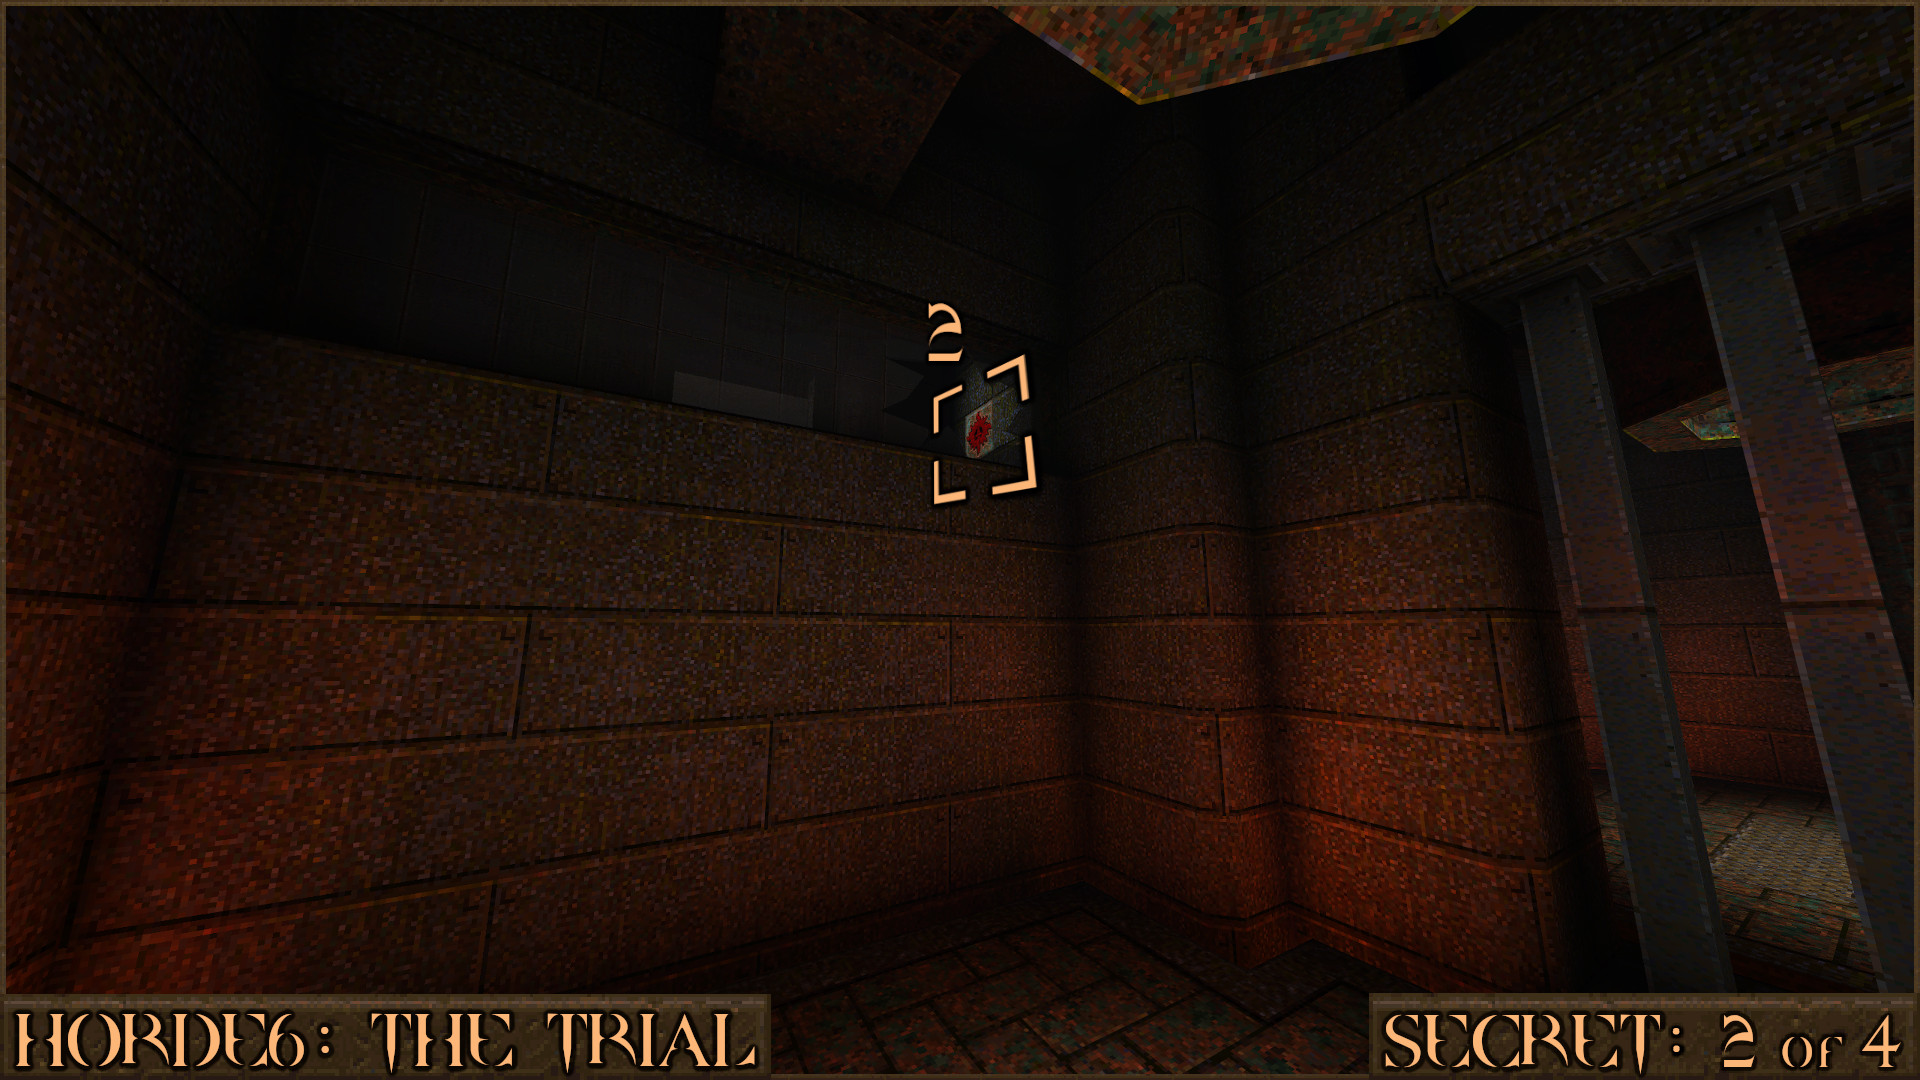 Quake - Finding all the Secrets - HORDE6: The Trial - 4621EA6